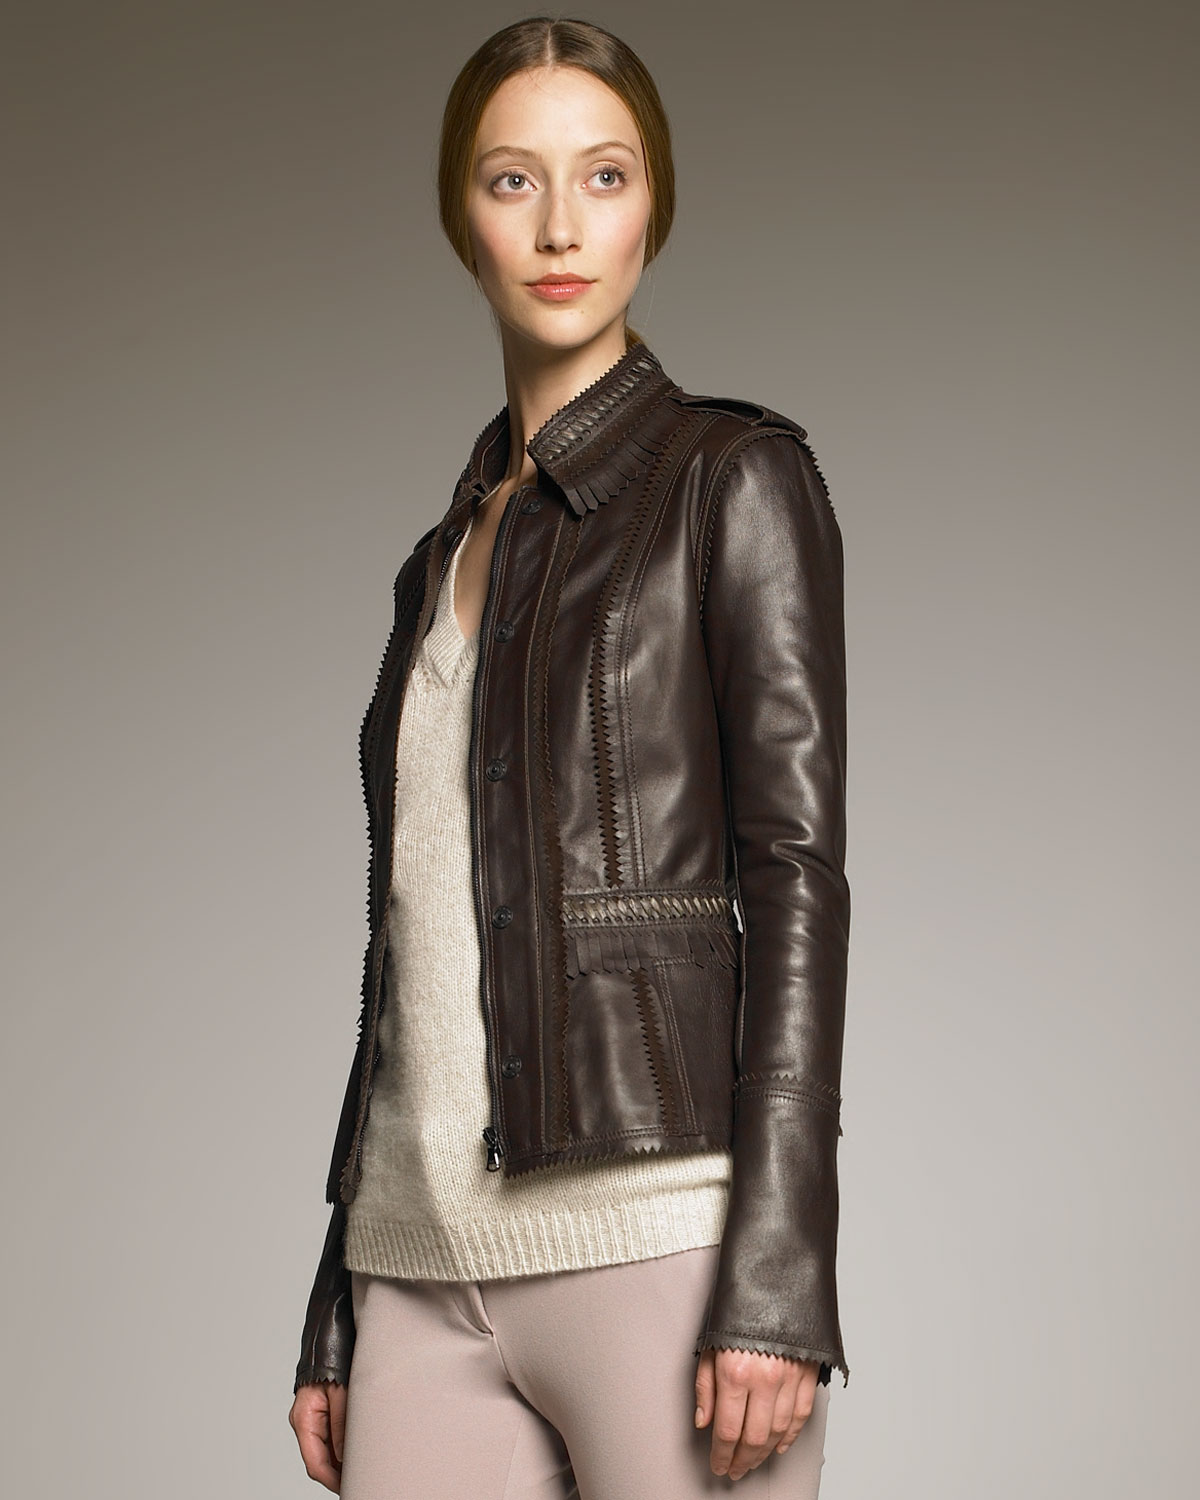 Lyst - Burberry prorsum Fringe-trim Bonded Leather Jacket in Brown